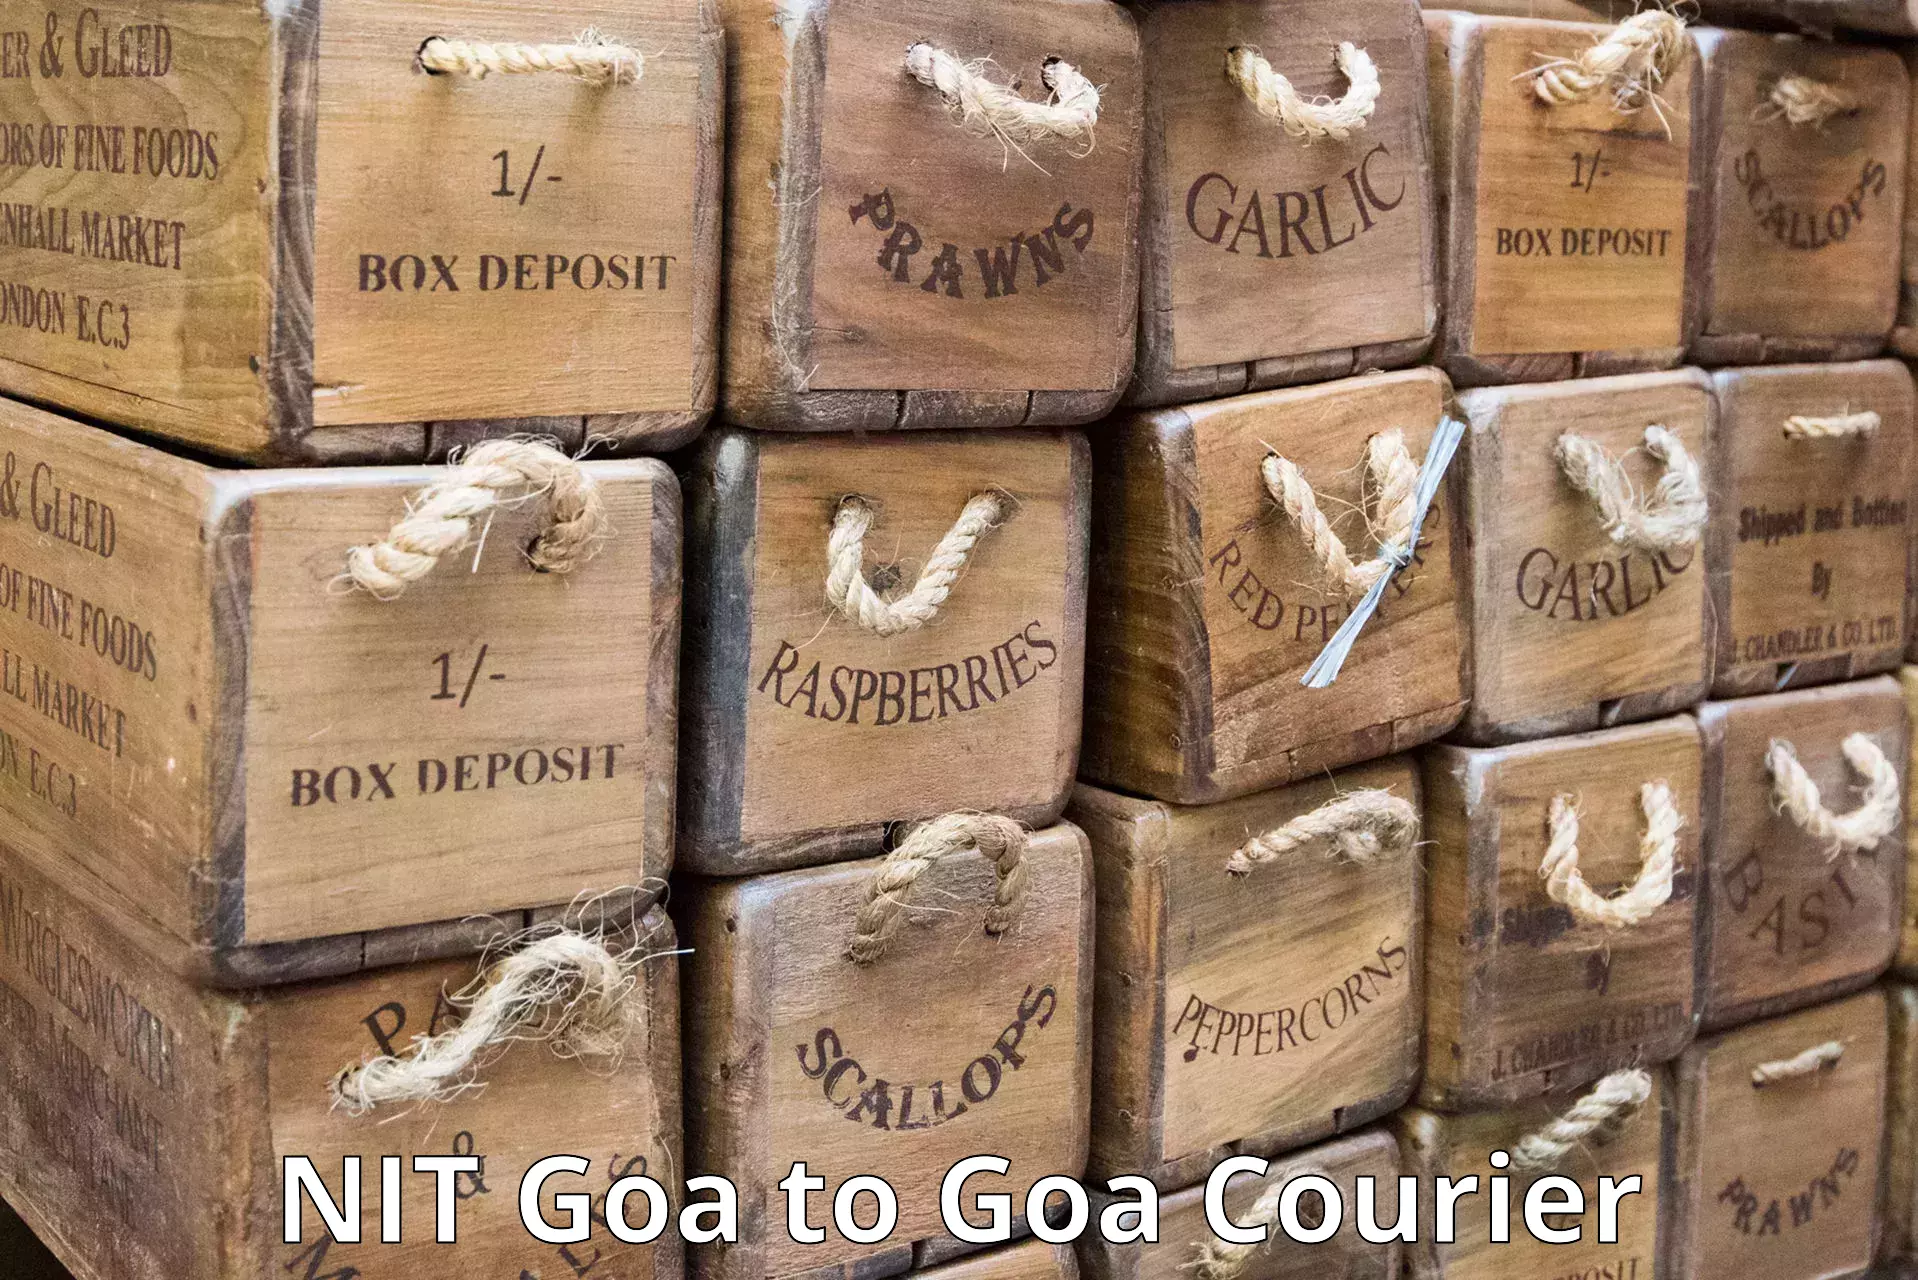 Express delivery network NIT Goa to Bardez